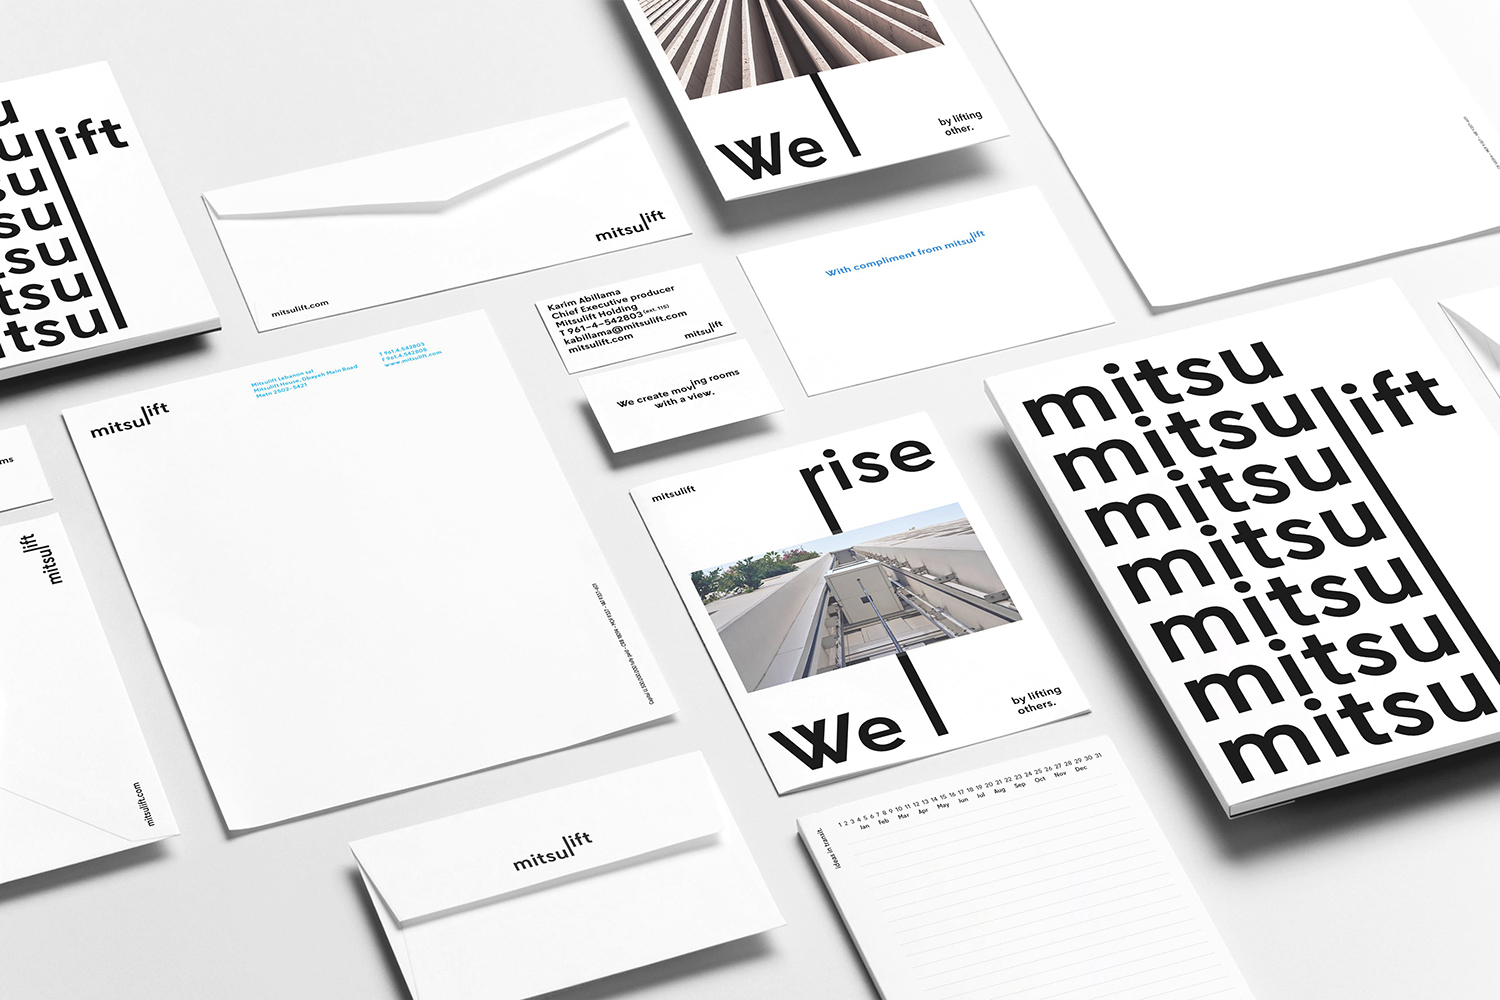 Graphic identity by Base Design for elevator specialist Mitsulift